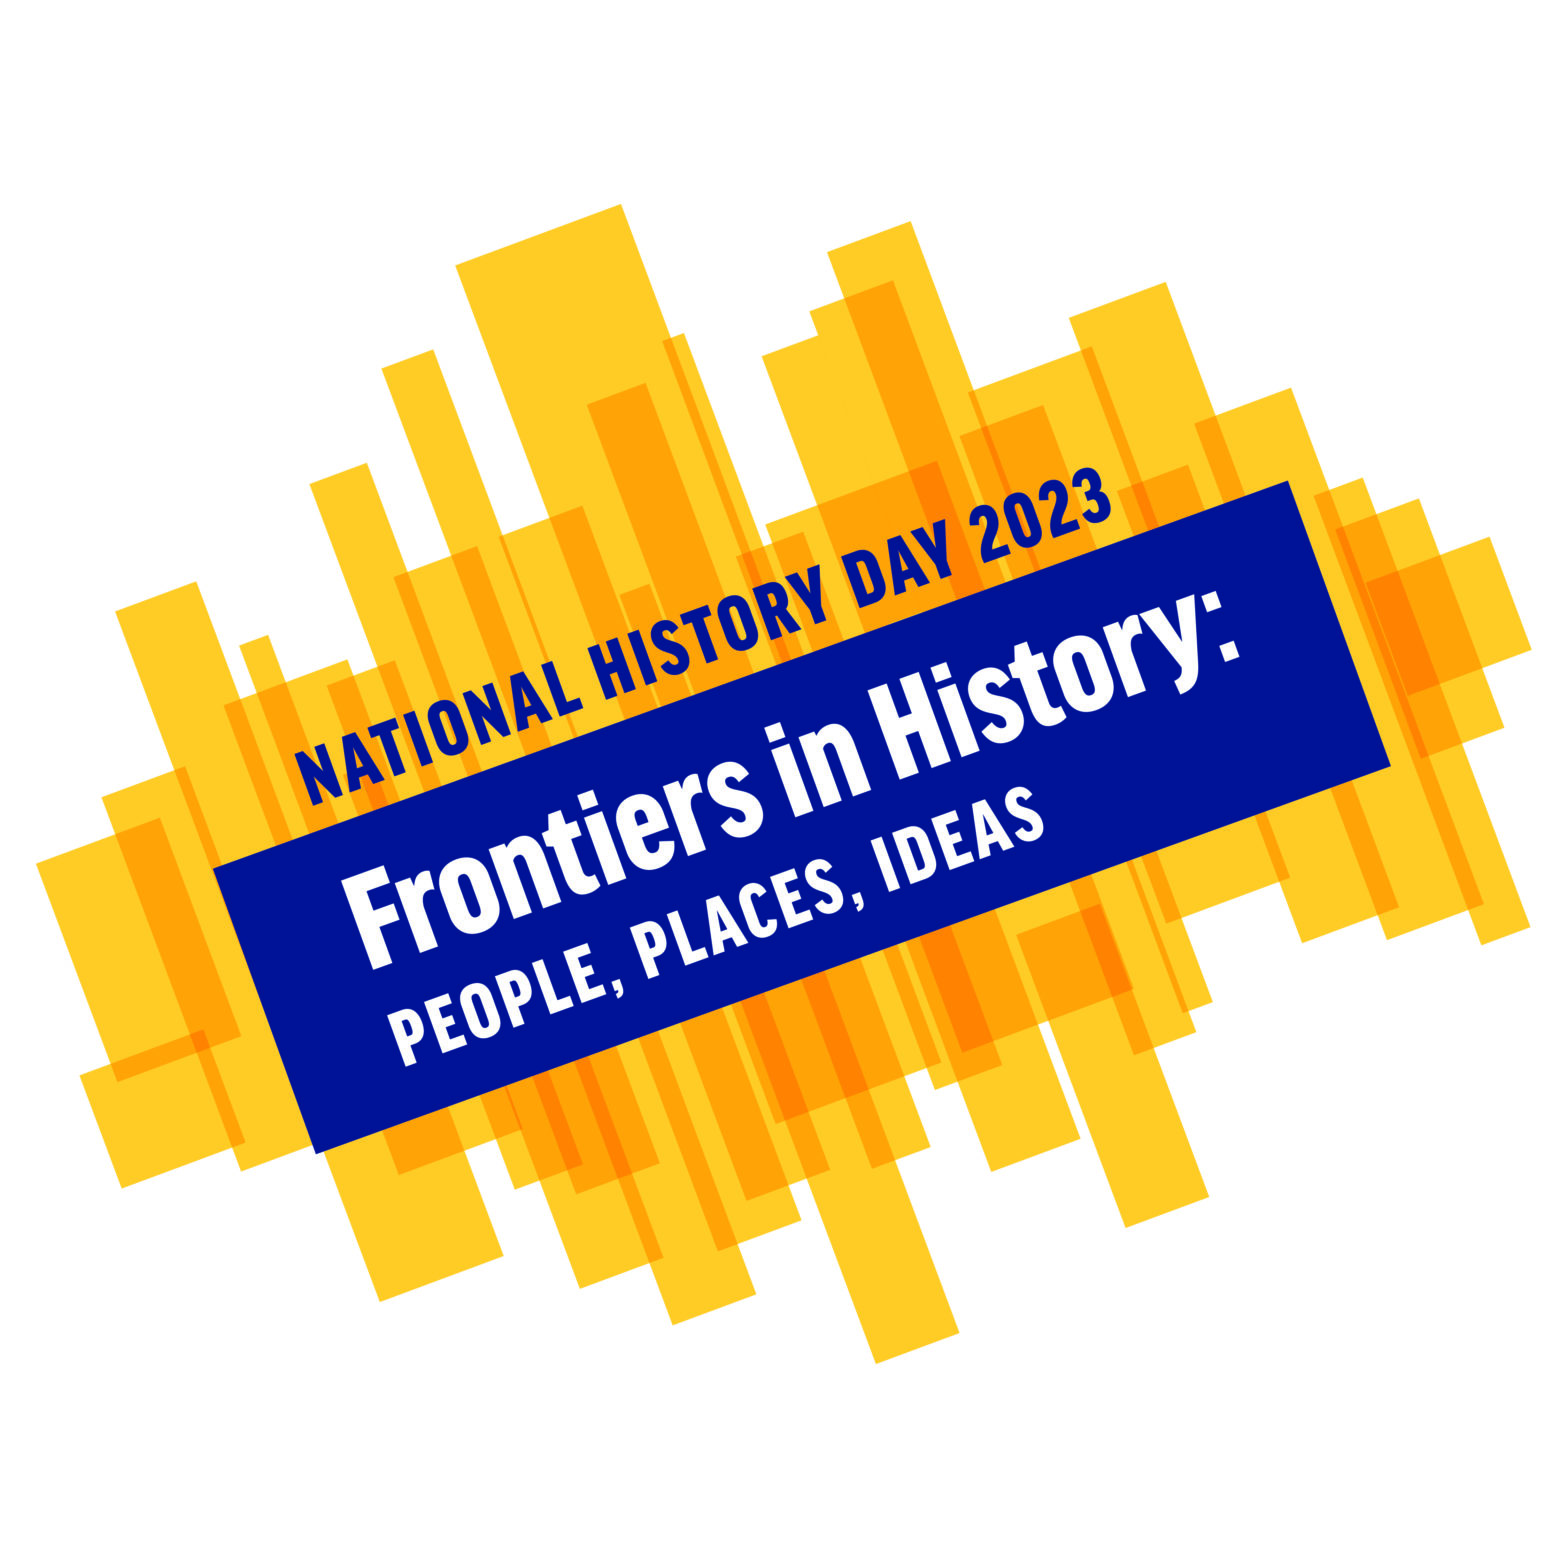 National History Day Frontiers in History